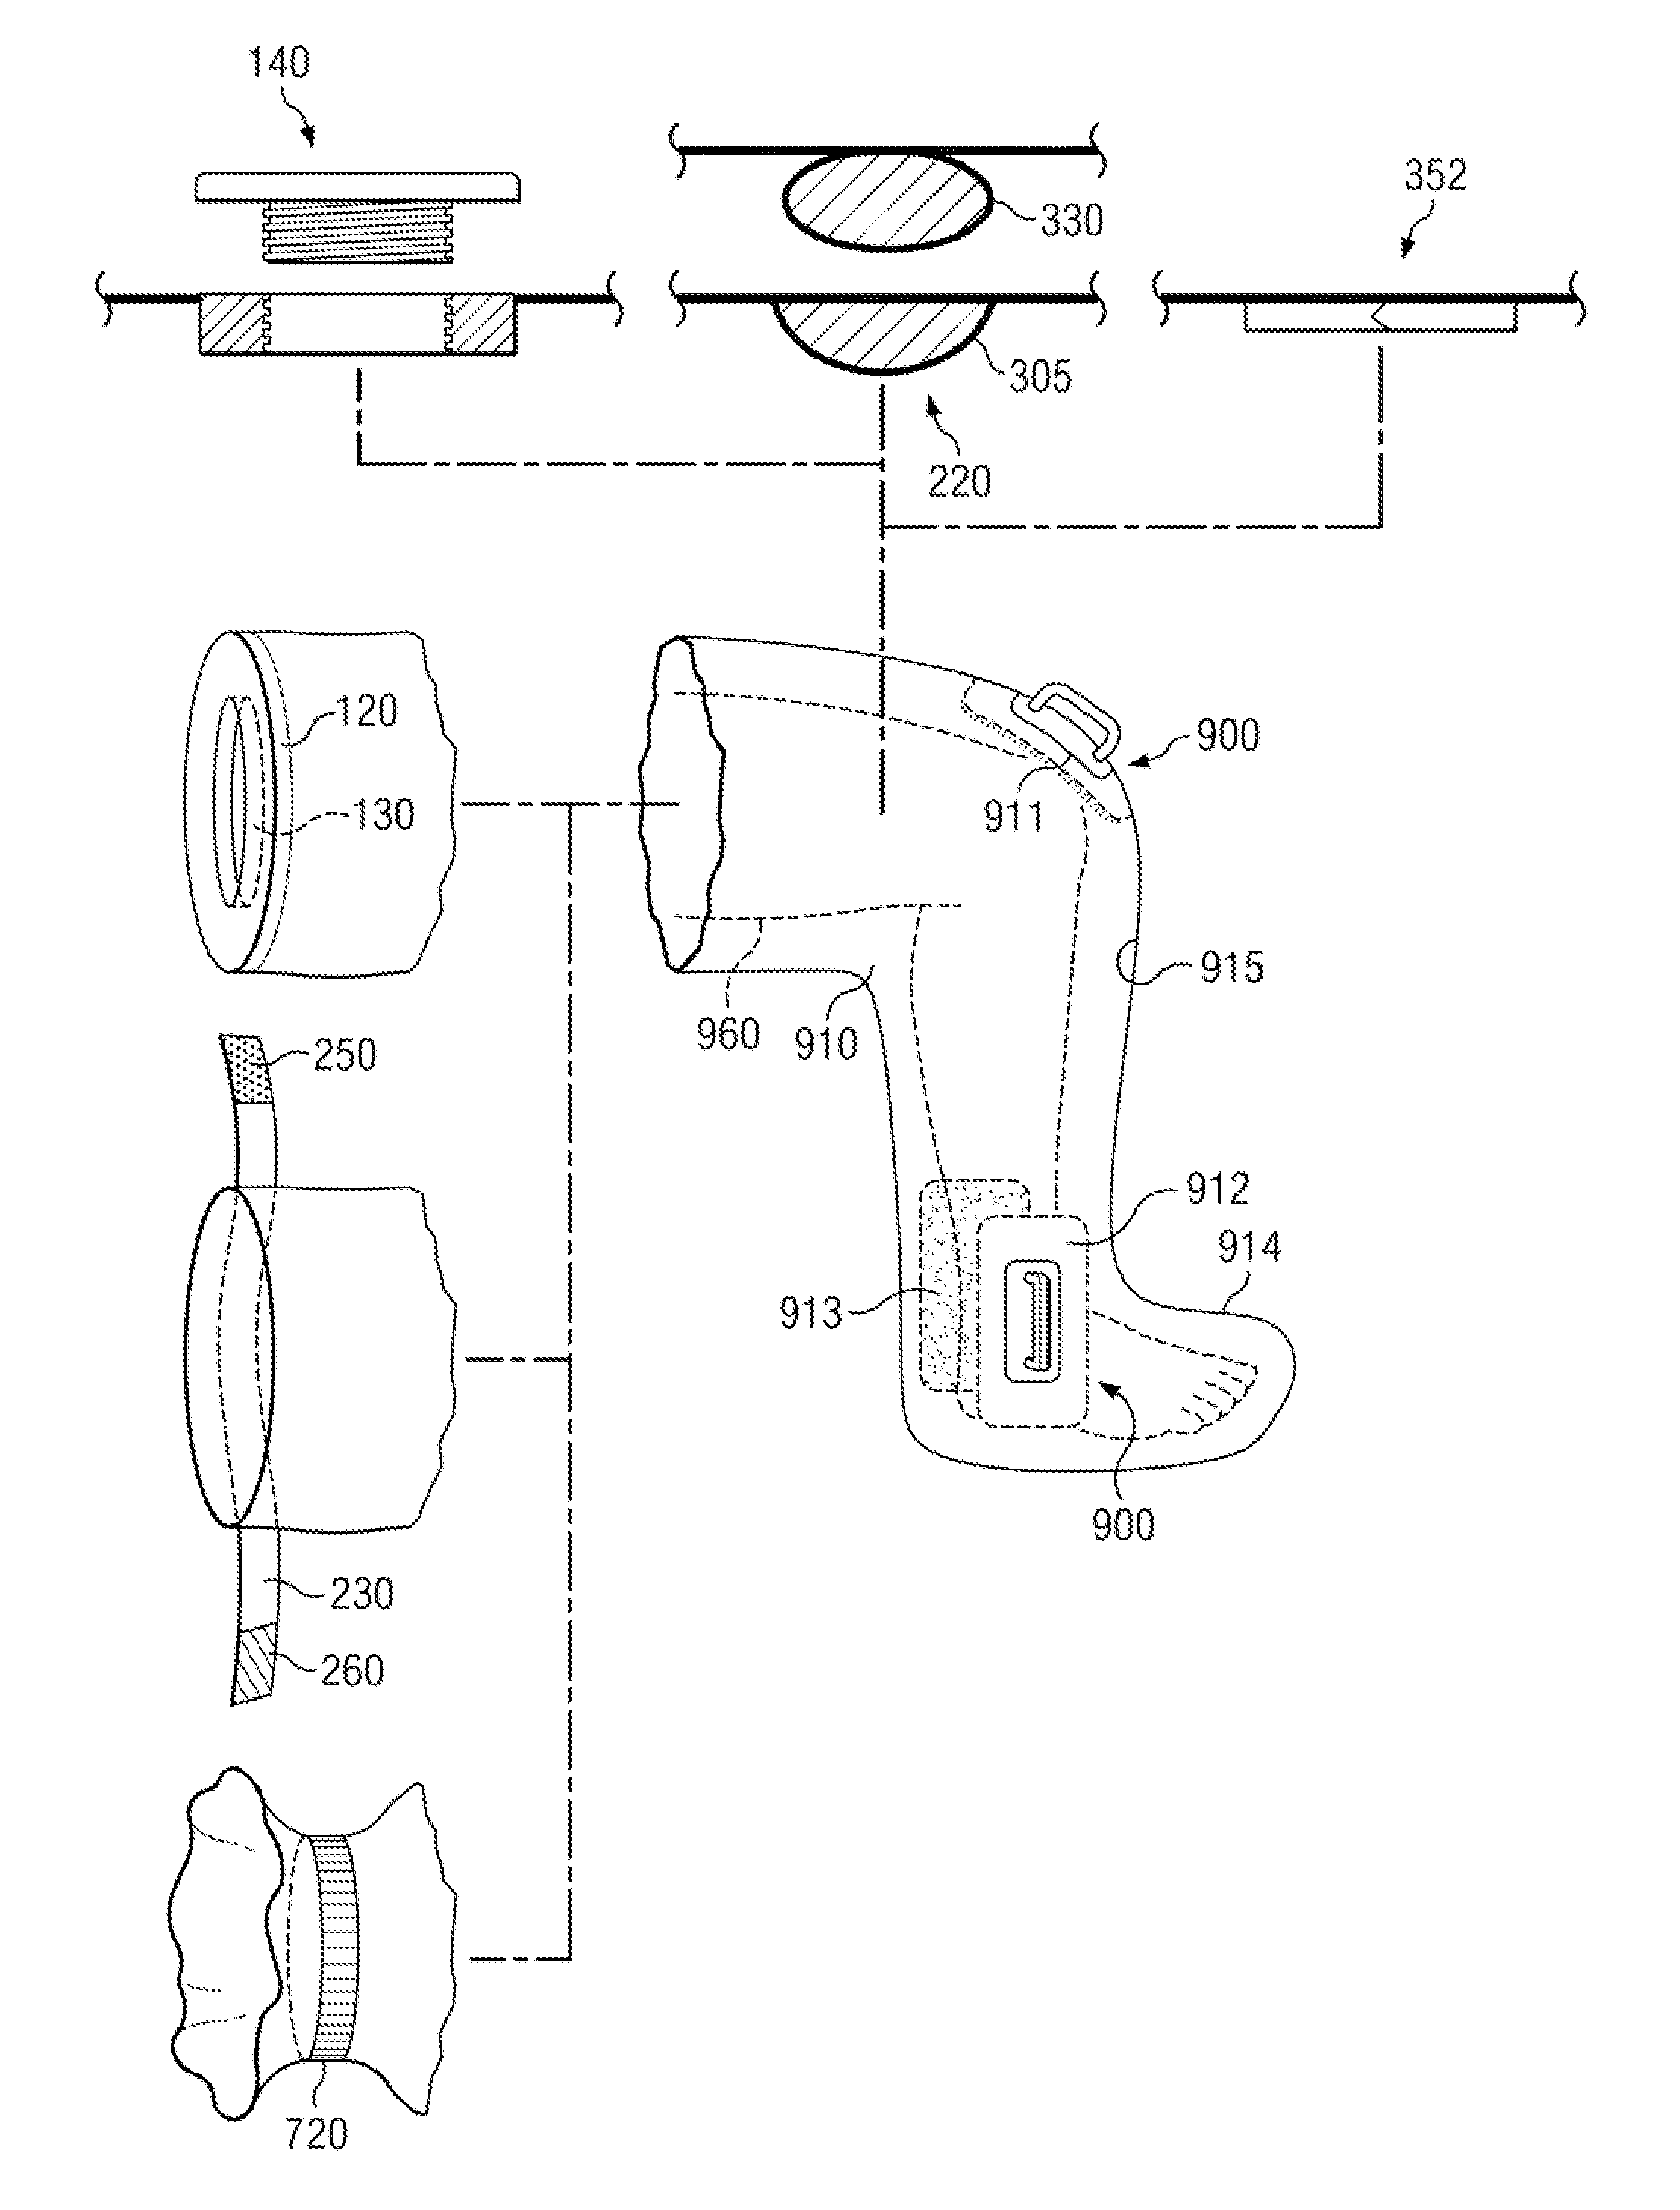 Apparatus and method for deploying a surgical preparation